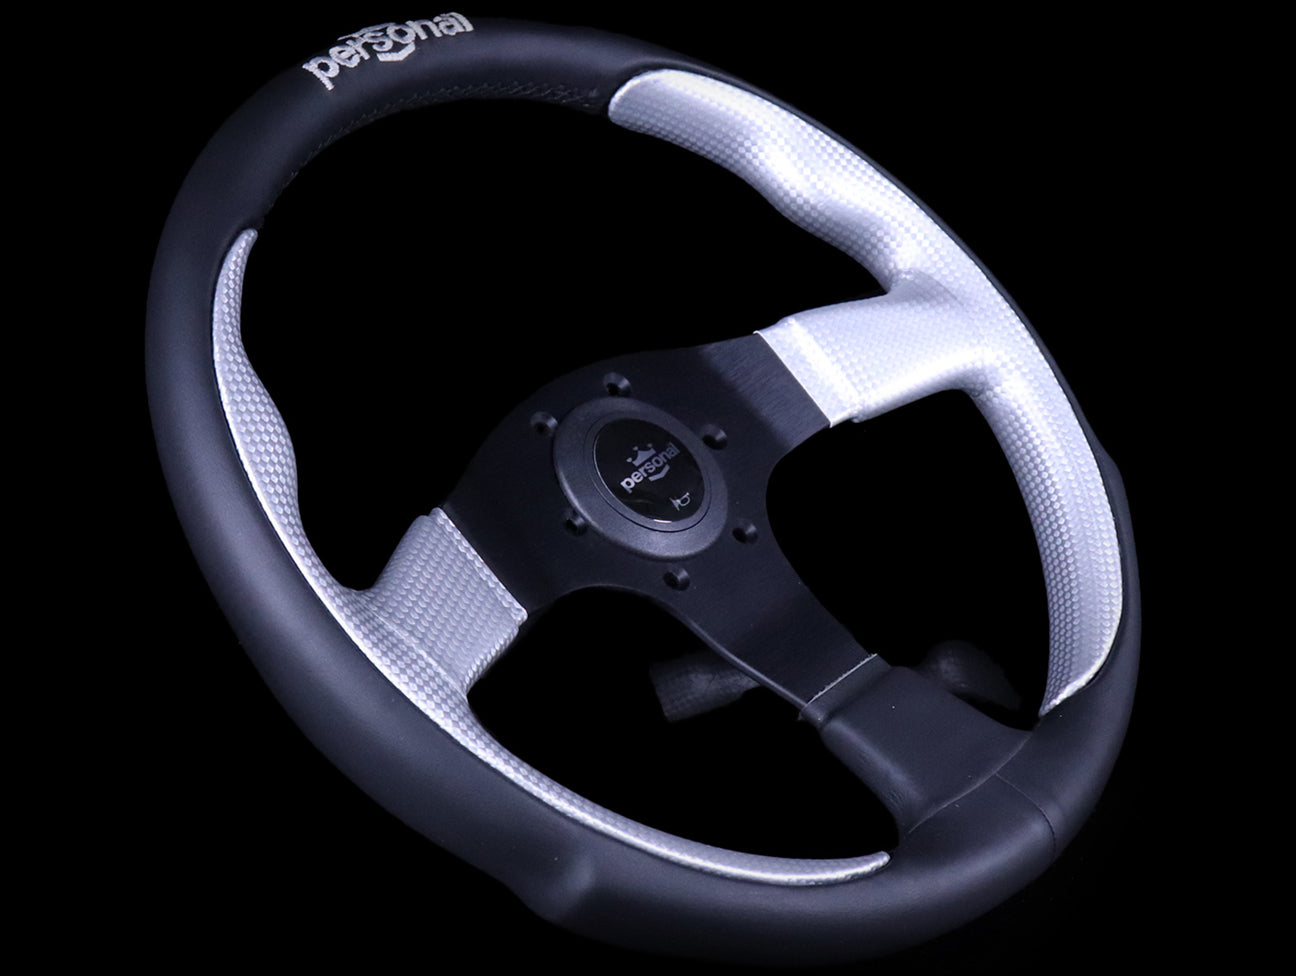 Personal Pole Position 350mm Steering Wheel - Black & Inox Silver Leather